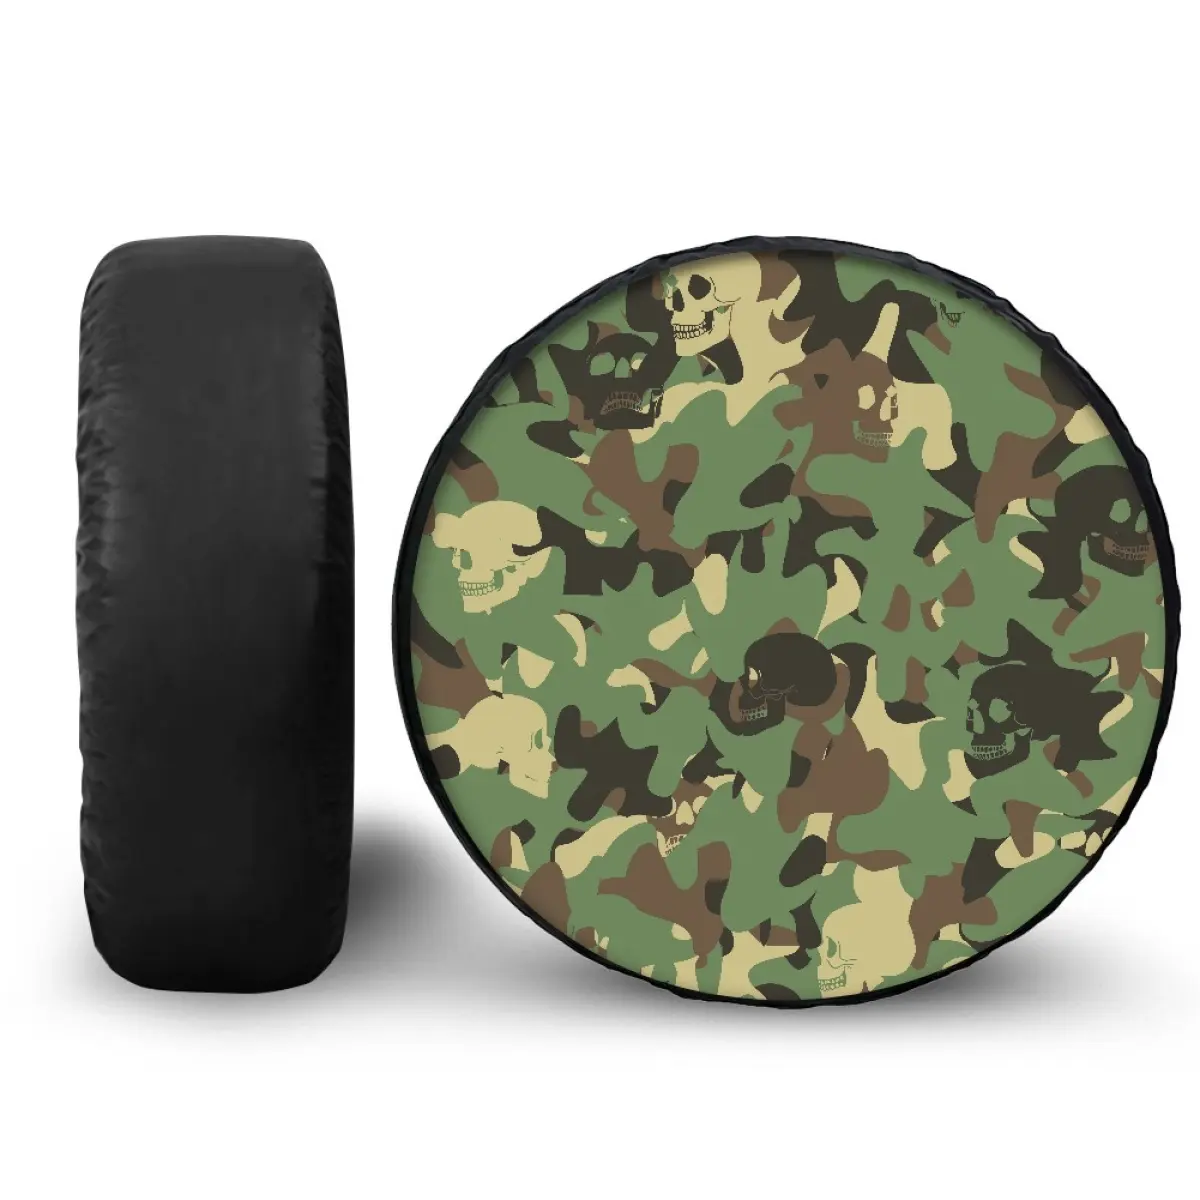 Spare Tire Cover Camouflage Skull for Jeep Trailer Rv Truck 14 15 16 17 Inch Sunscreen Dustproof Corrosion Proof Wheel Cover